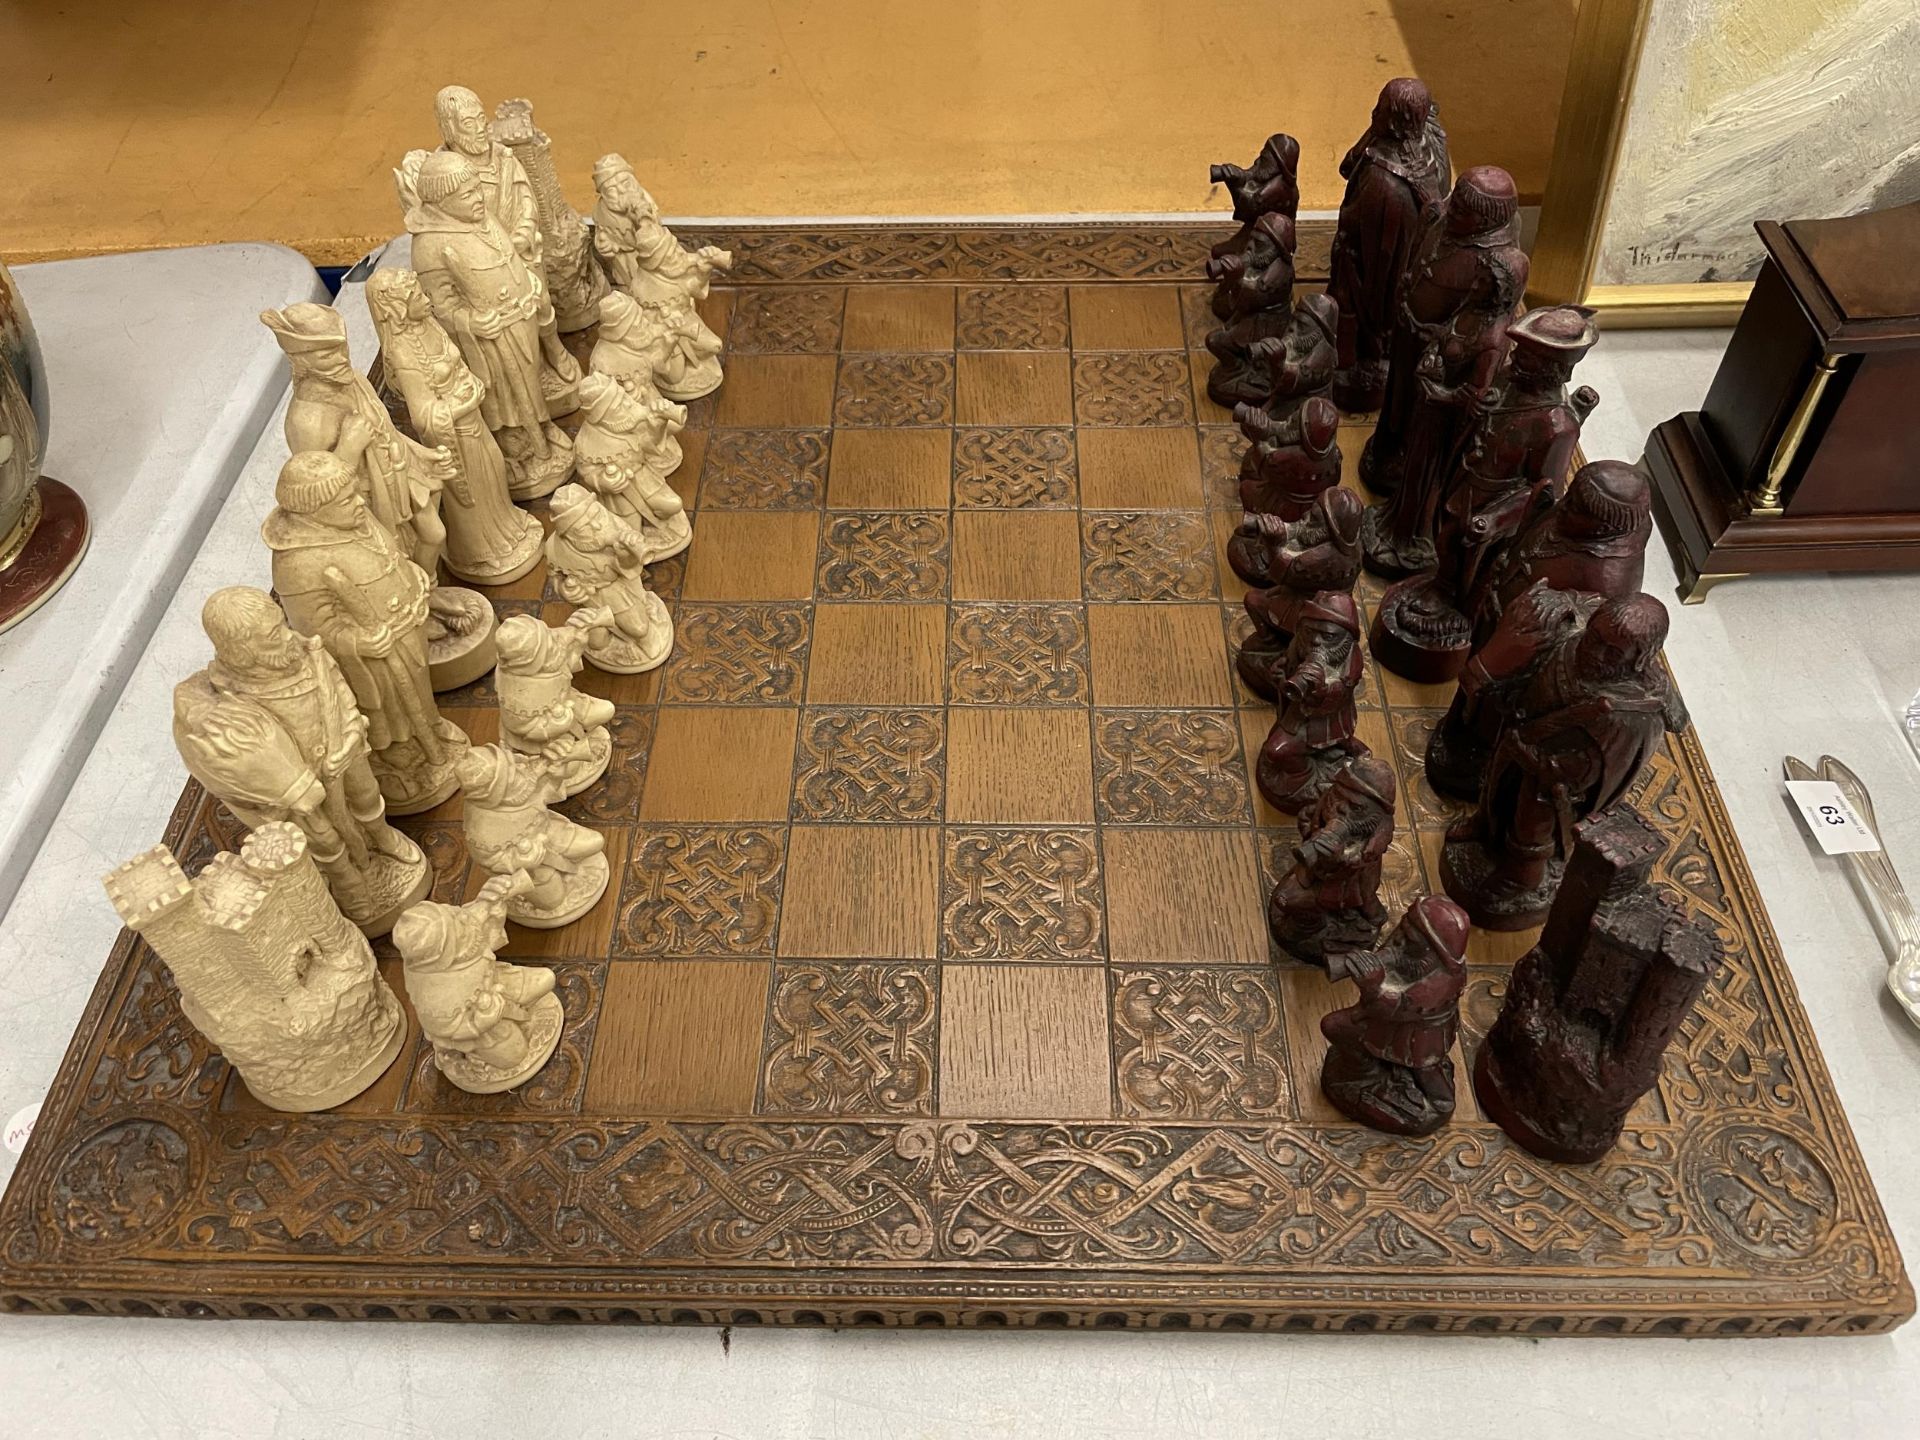 A VERY LARGE AND COMPLETE ROBIN HOOD RESIN CHESS SET WITH PIECES UP TO AND OVER 15CM TALL,